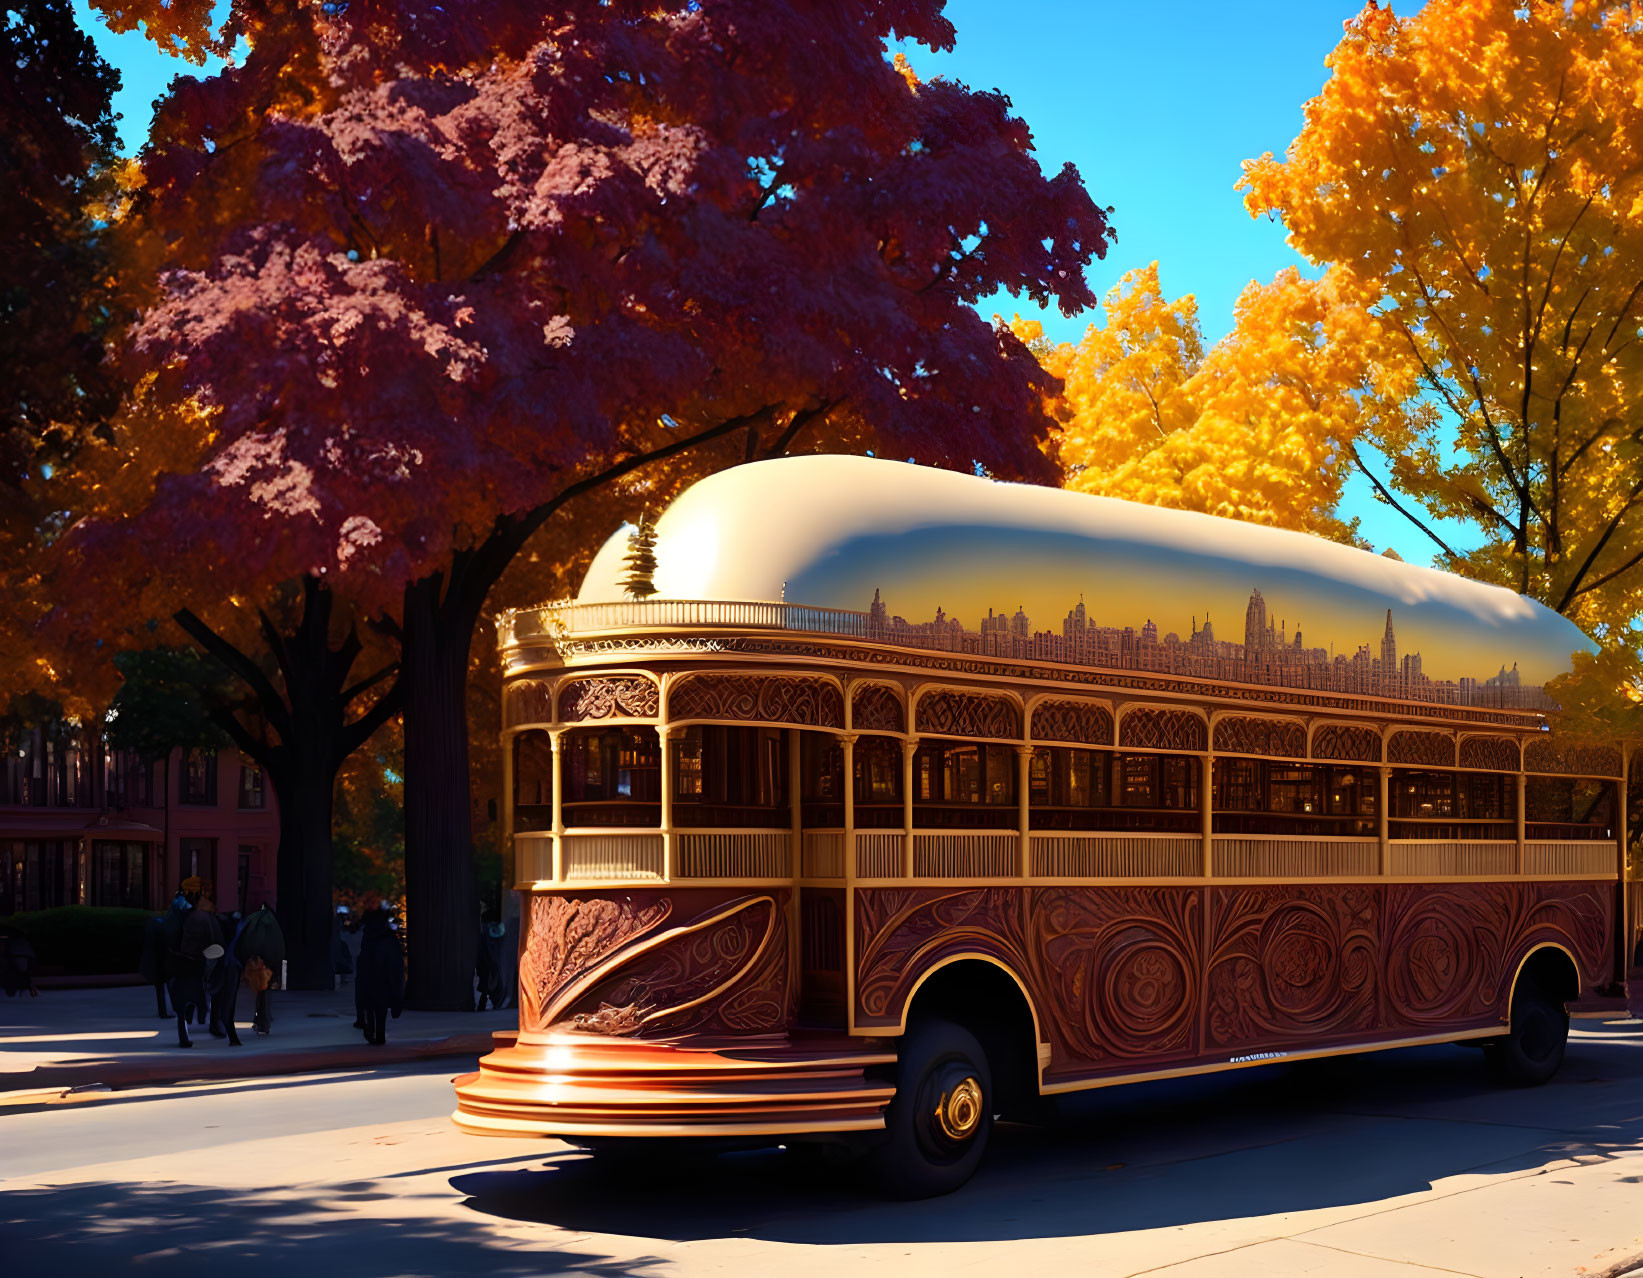 Vintage-style bus with intricate designs in autumn street scene